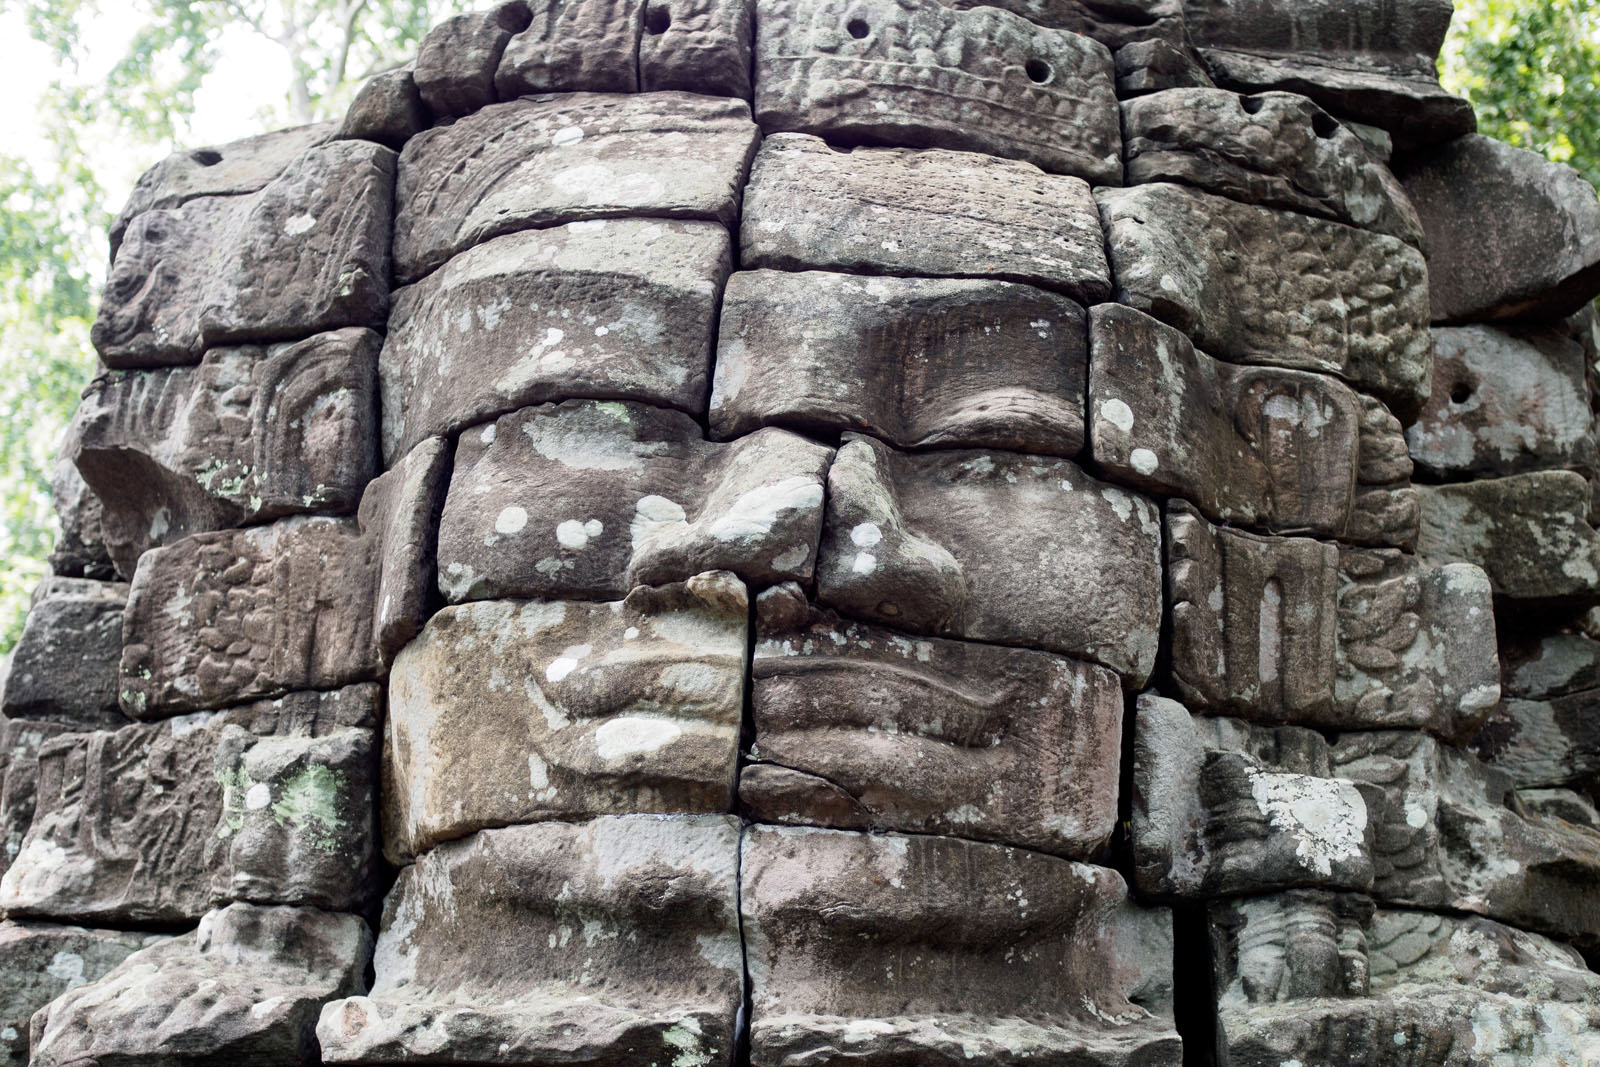 Like Bayon temple in Siem Reap, Banteay Chhmar’s Ta Prohm temple features distinctive four-sided face carvings. Photo by Emily Lush